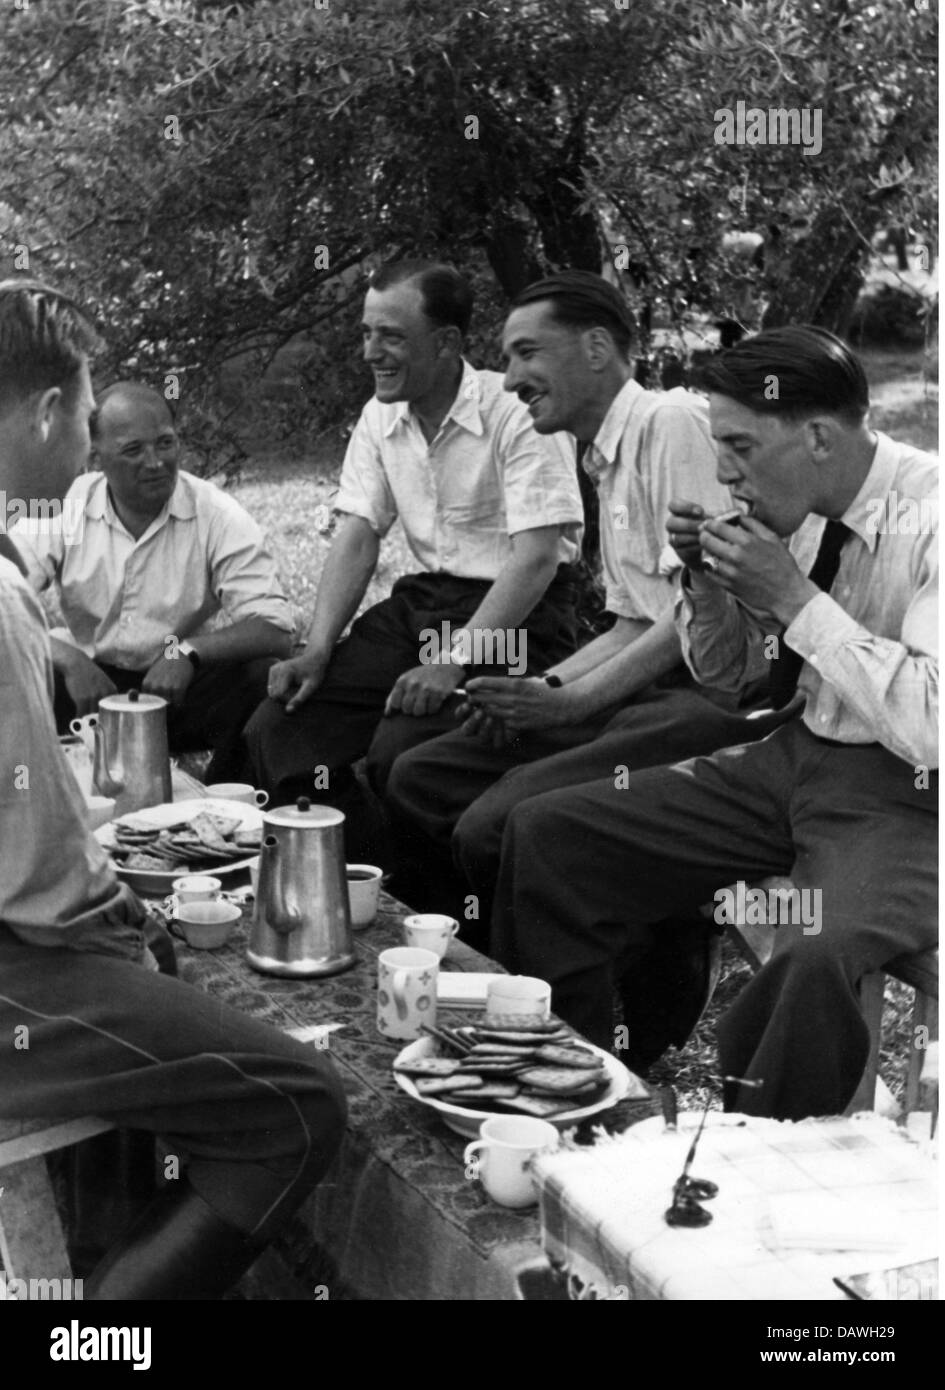 events, Second World War / WWII, Greece, Balkans Campaign 1941, Wehrmacht officers relaxing, Domokos, April 1941, Additional-Rights-Clearences-Not Available Stock Photo